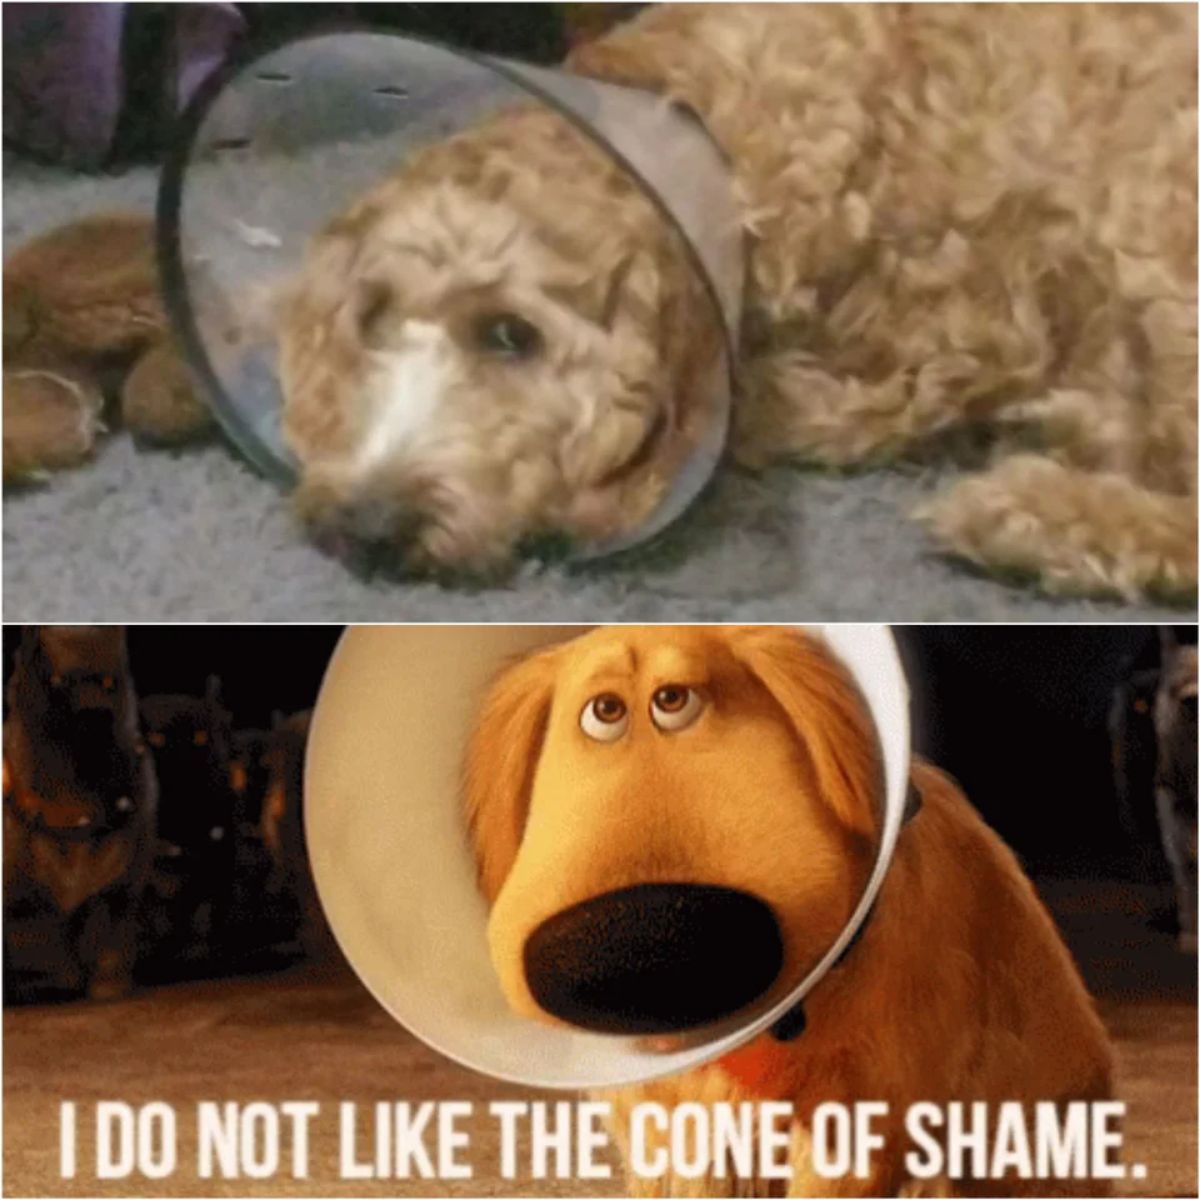 1 photo of brown fluffy dog in a cone of shame and 1 photo of brown dog Doug from the movie Up in a cone of shame